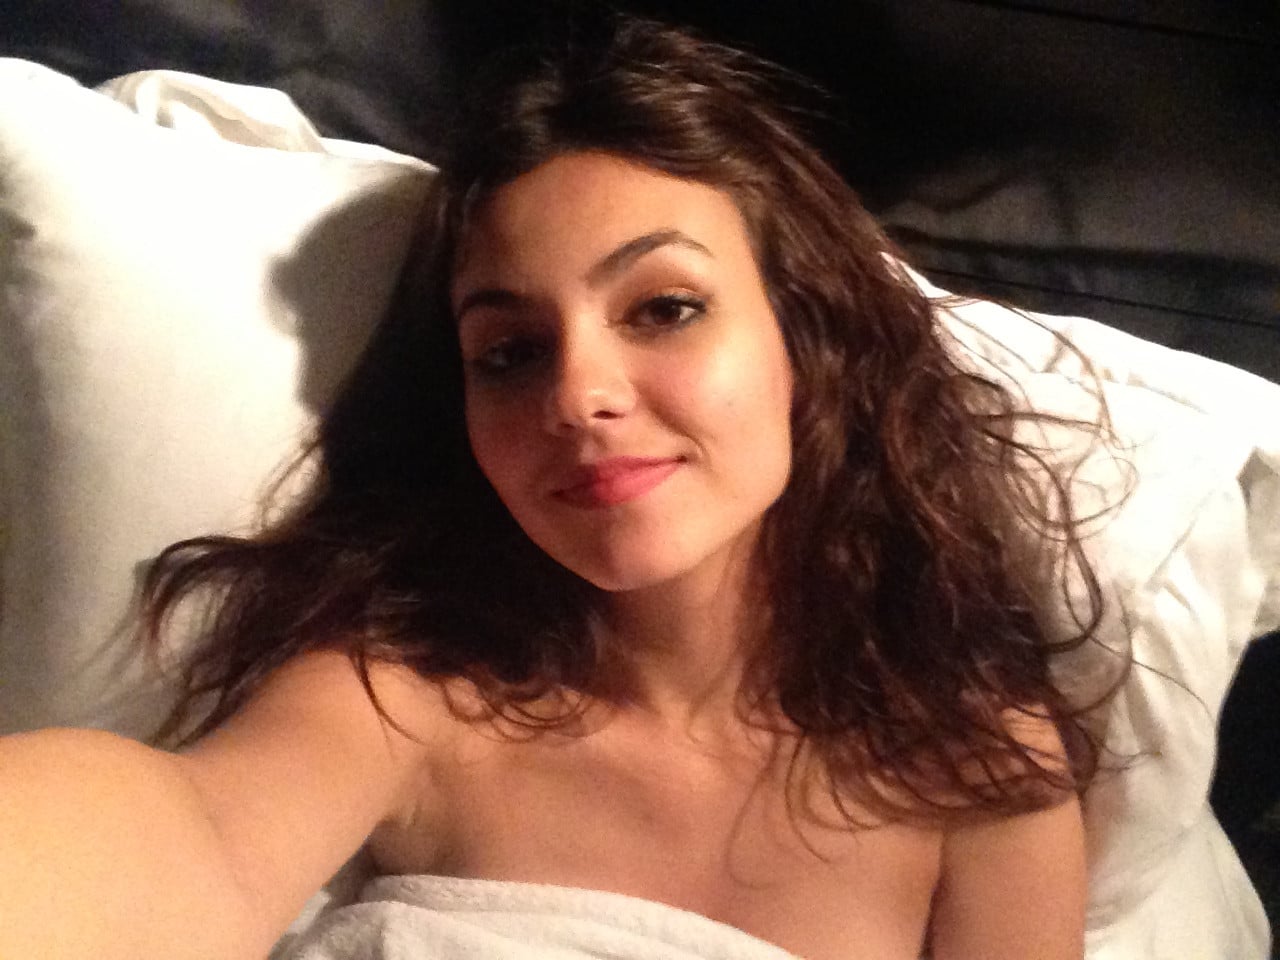 fappening pic of singer victoria justice taking a selfie in bed